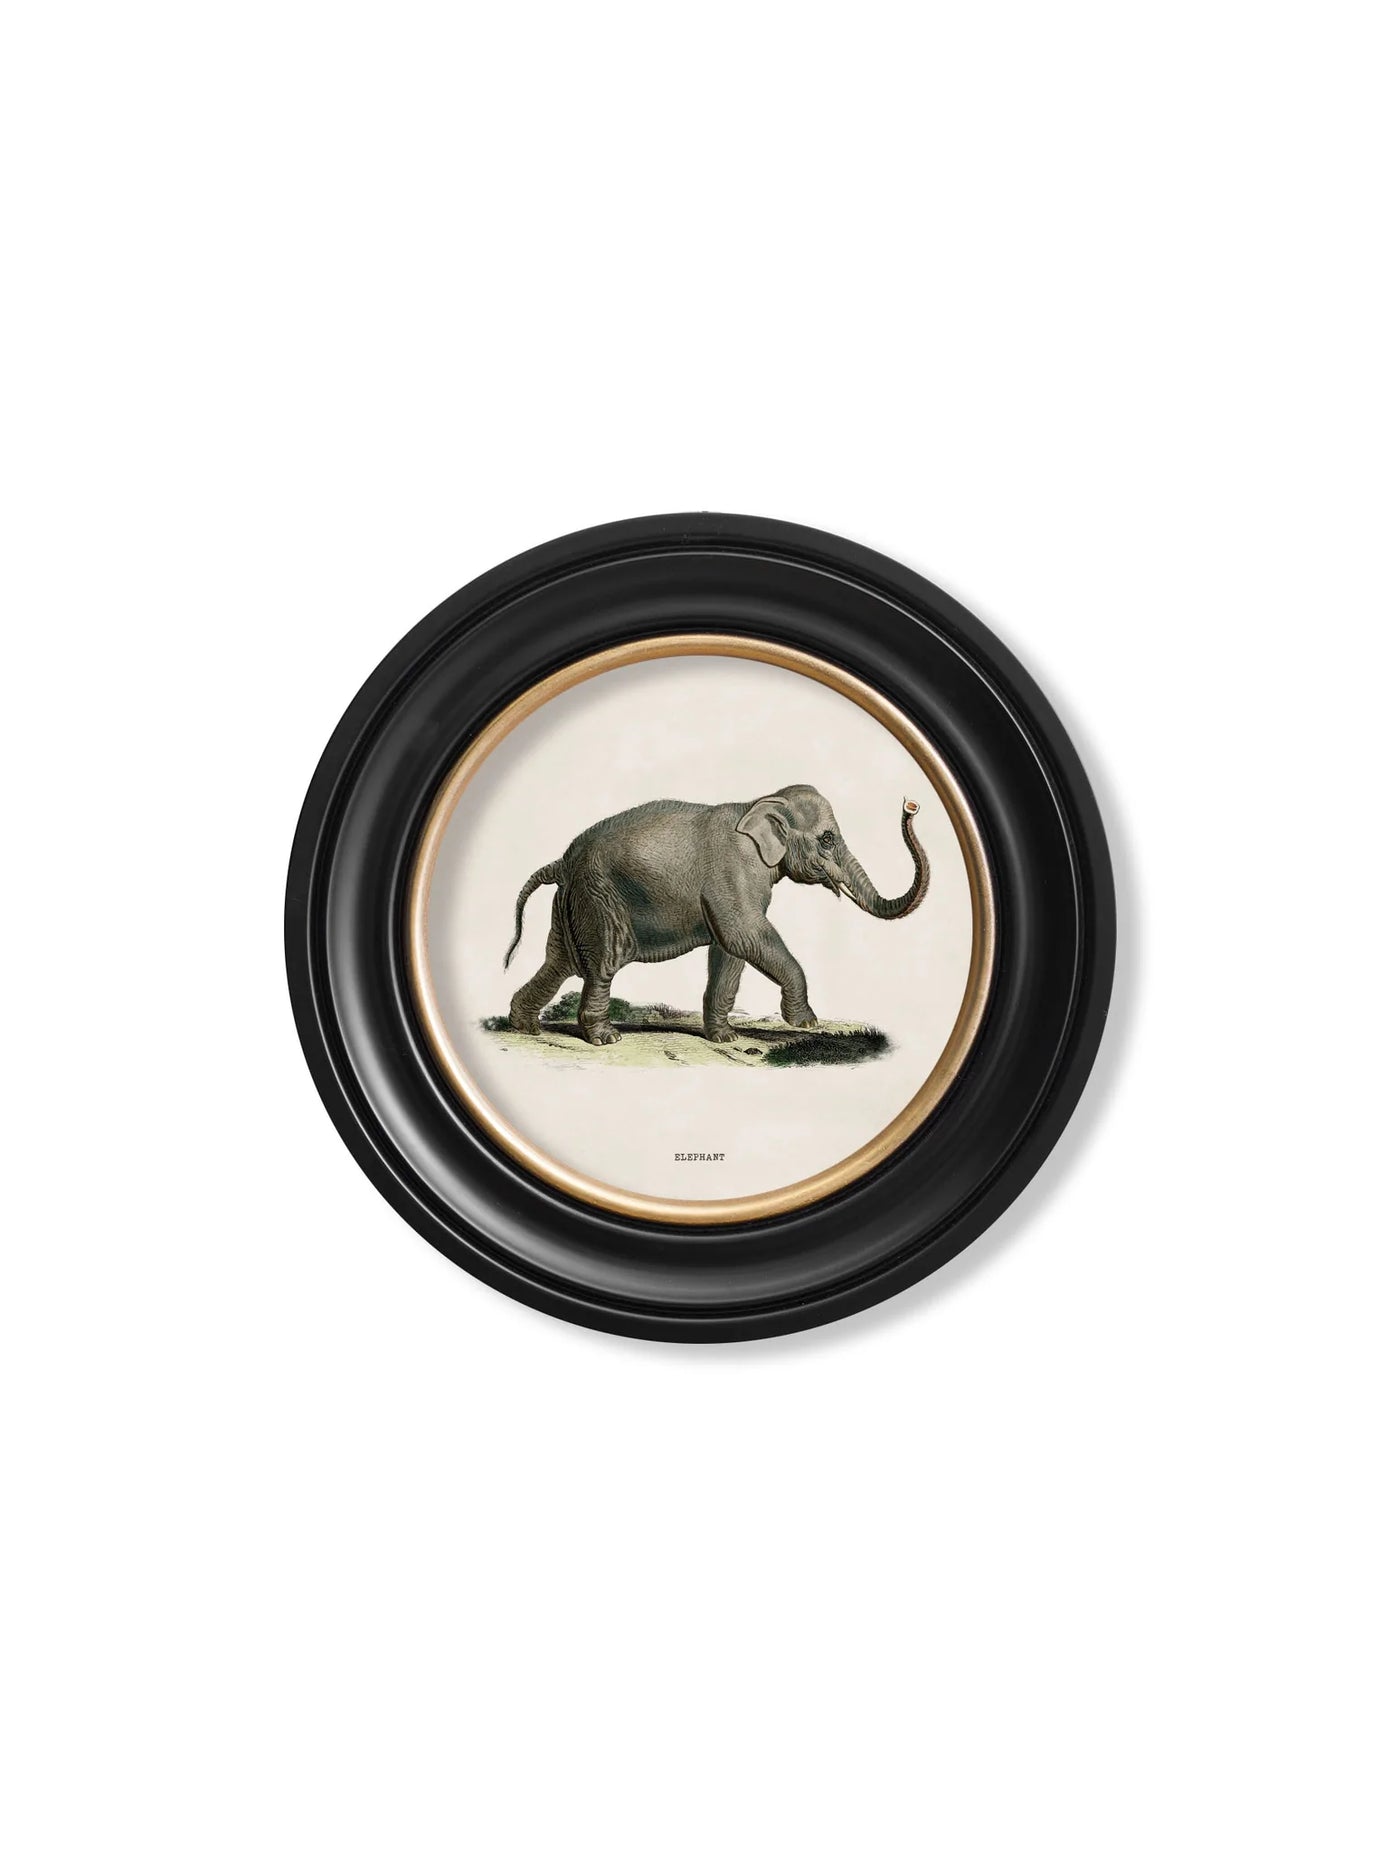 C.1846 ELEPHANTS IN ROUND FRAME - TheArtistsQuarter